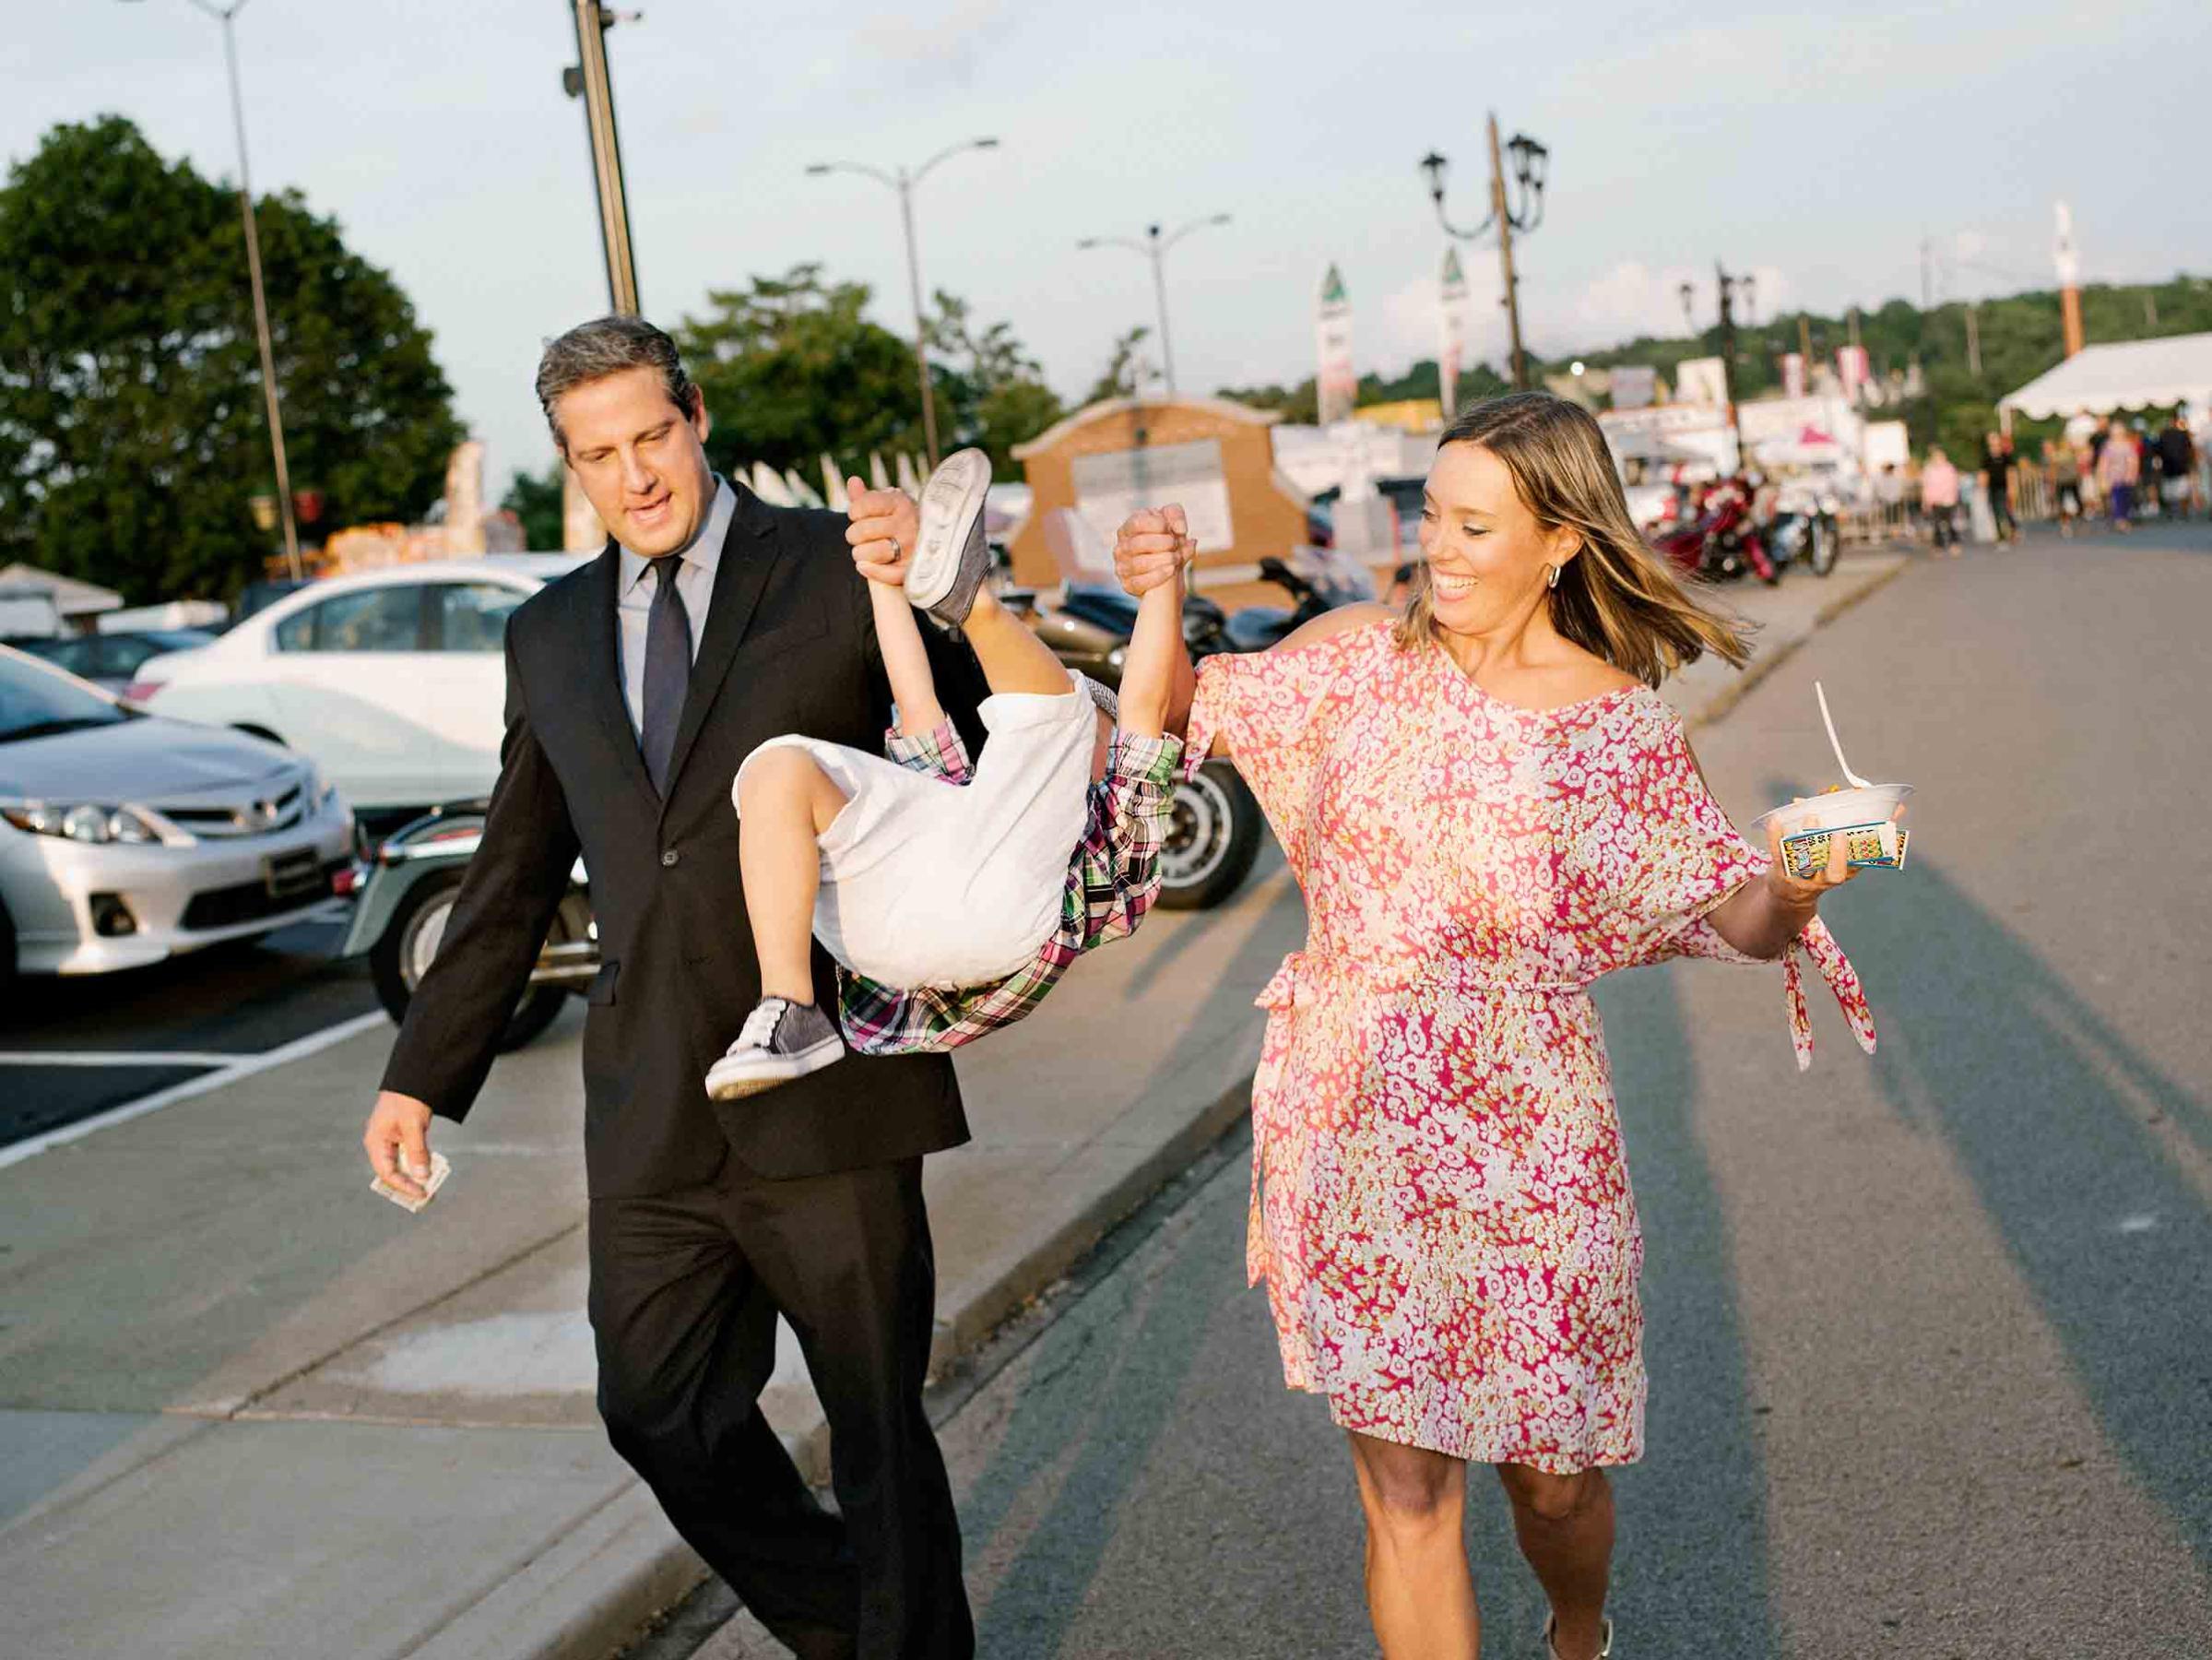 Ryan, with wife Andrea and son Brady, leaves an Italian festival in Youngstown, Ohio, on July 21